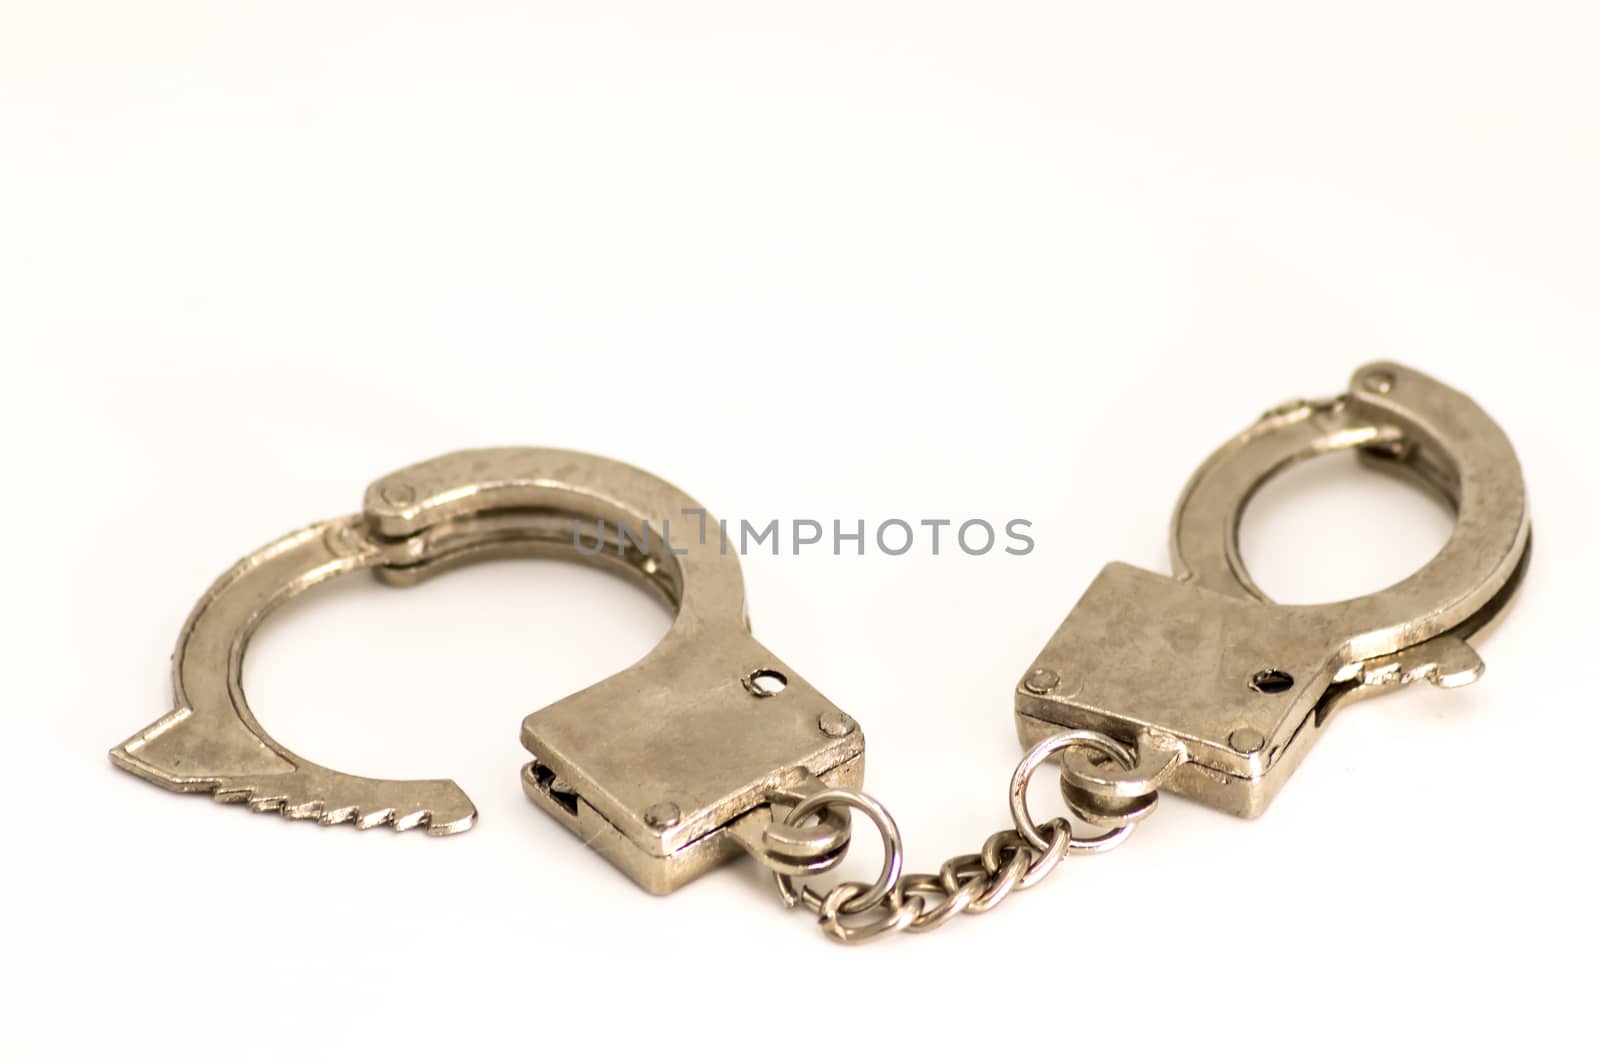 Pair of handcuffs close up front view by Philou1000